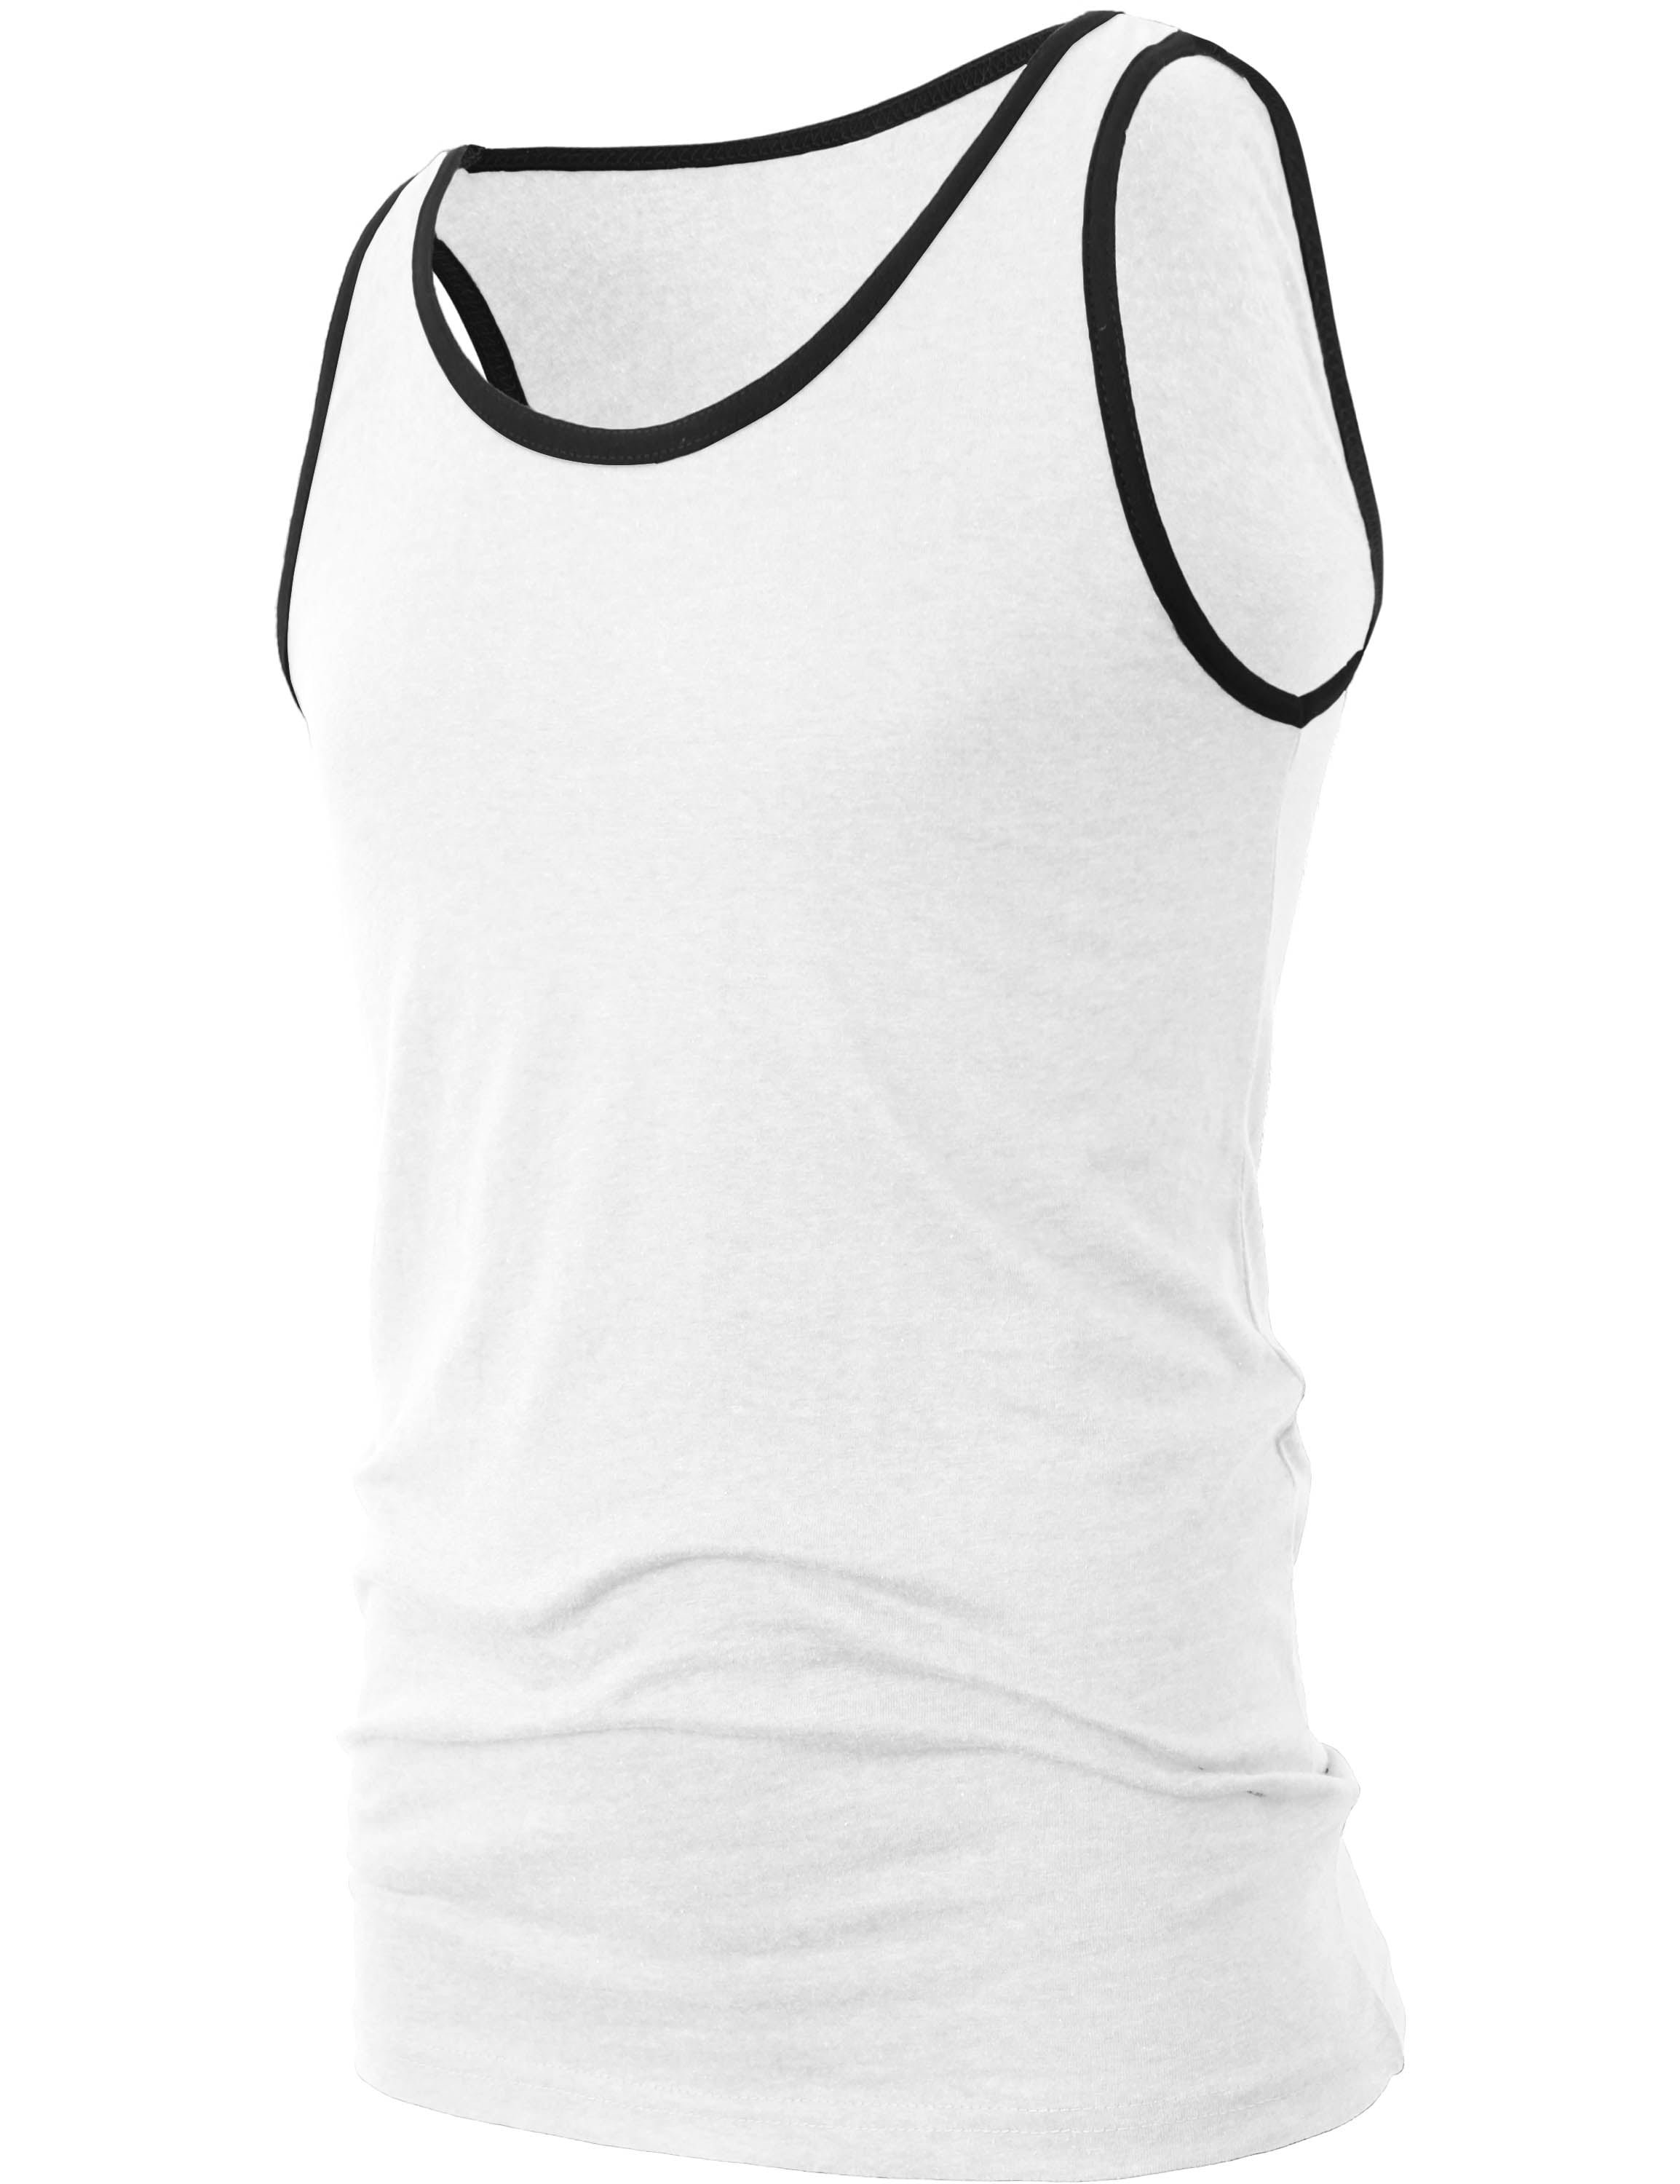 Hat and Beyond Men's Athletic Sportswear Sleeveless Tank Top T-Shirts ...